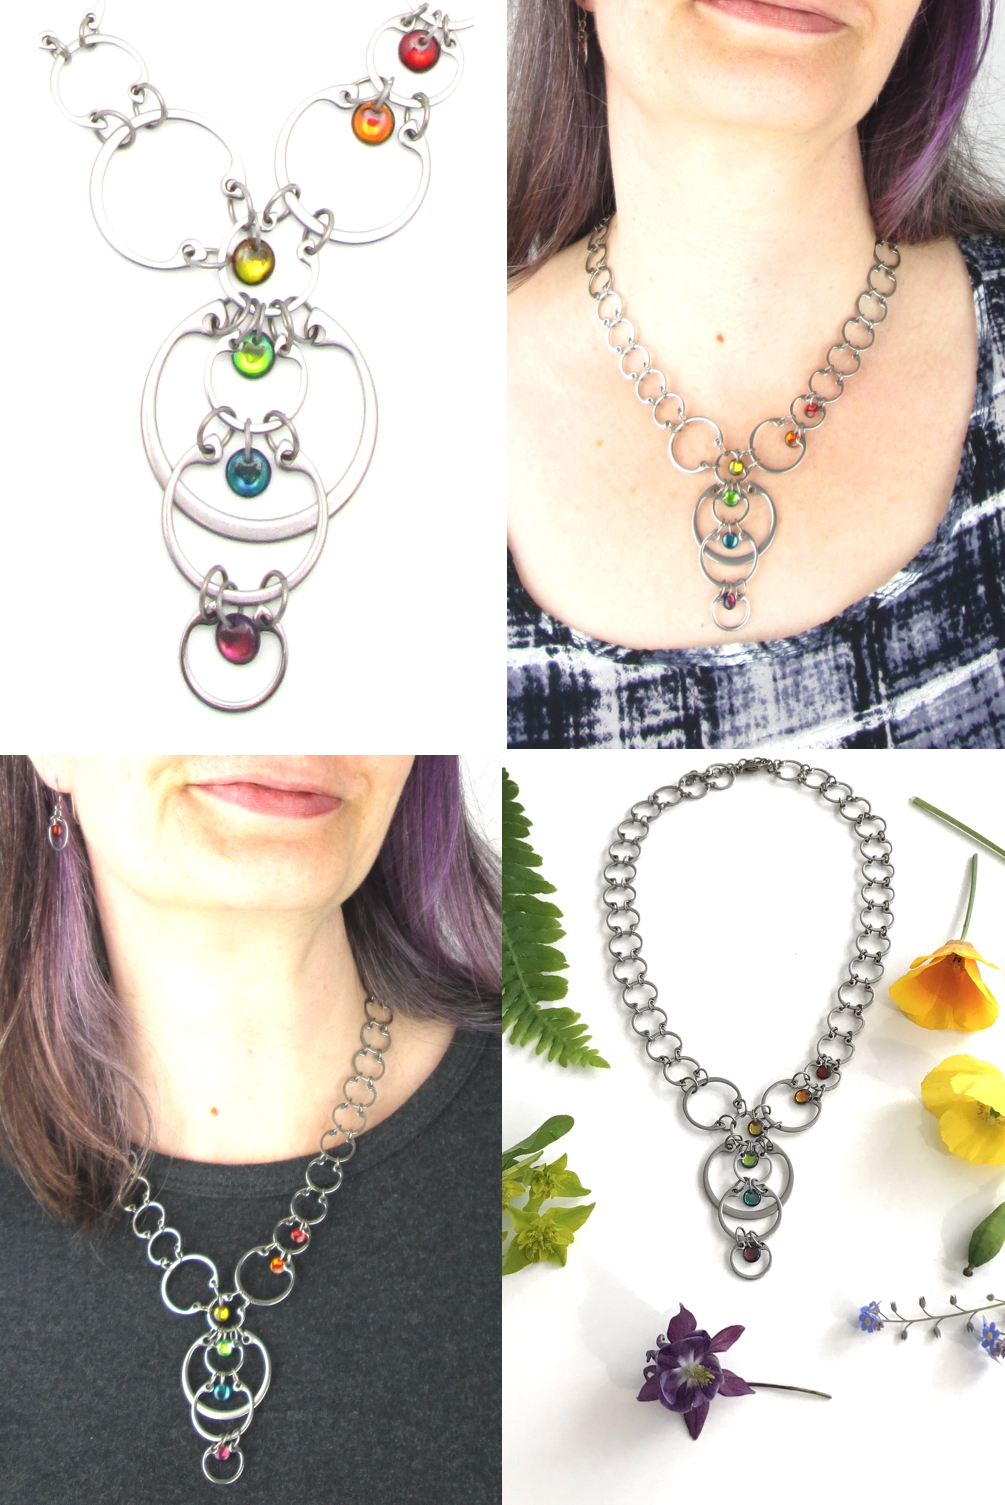 4 photos of Wraptillion's Cascading Rainbow Circles Necklace compiled to form a grid: detail, cropped modeled image with black & white top, cropped modeled image with dark gray top, flatlay with a rainbow of flowers.